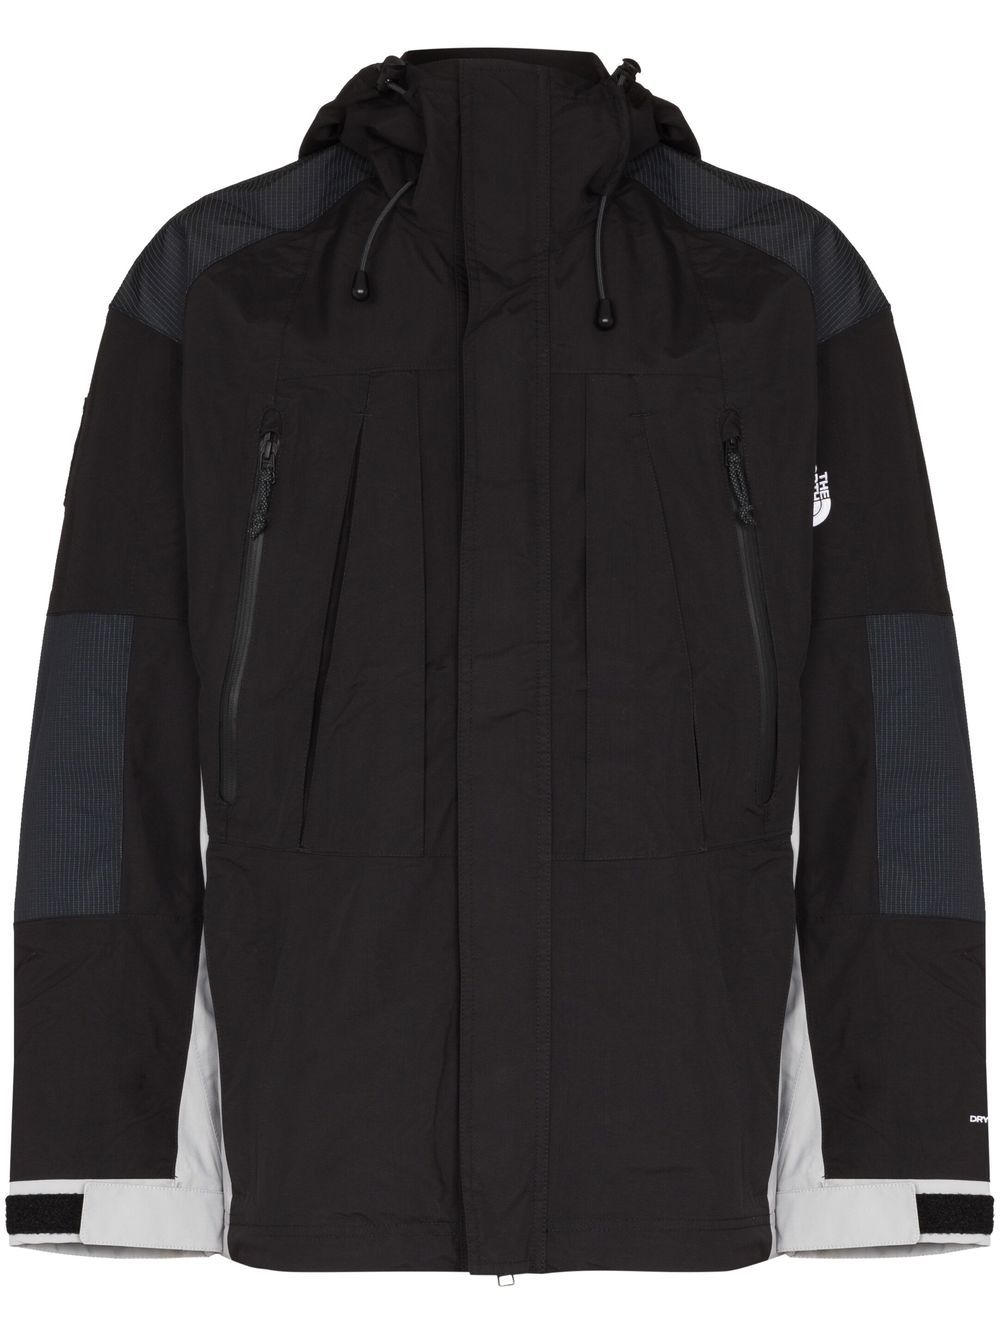 The North Face Phlego 2L DryVent jacket - Black von The North Face